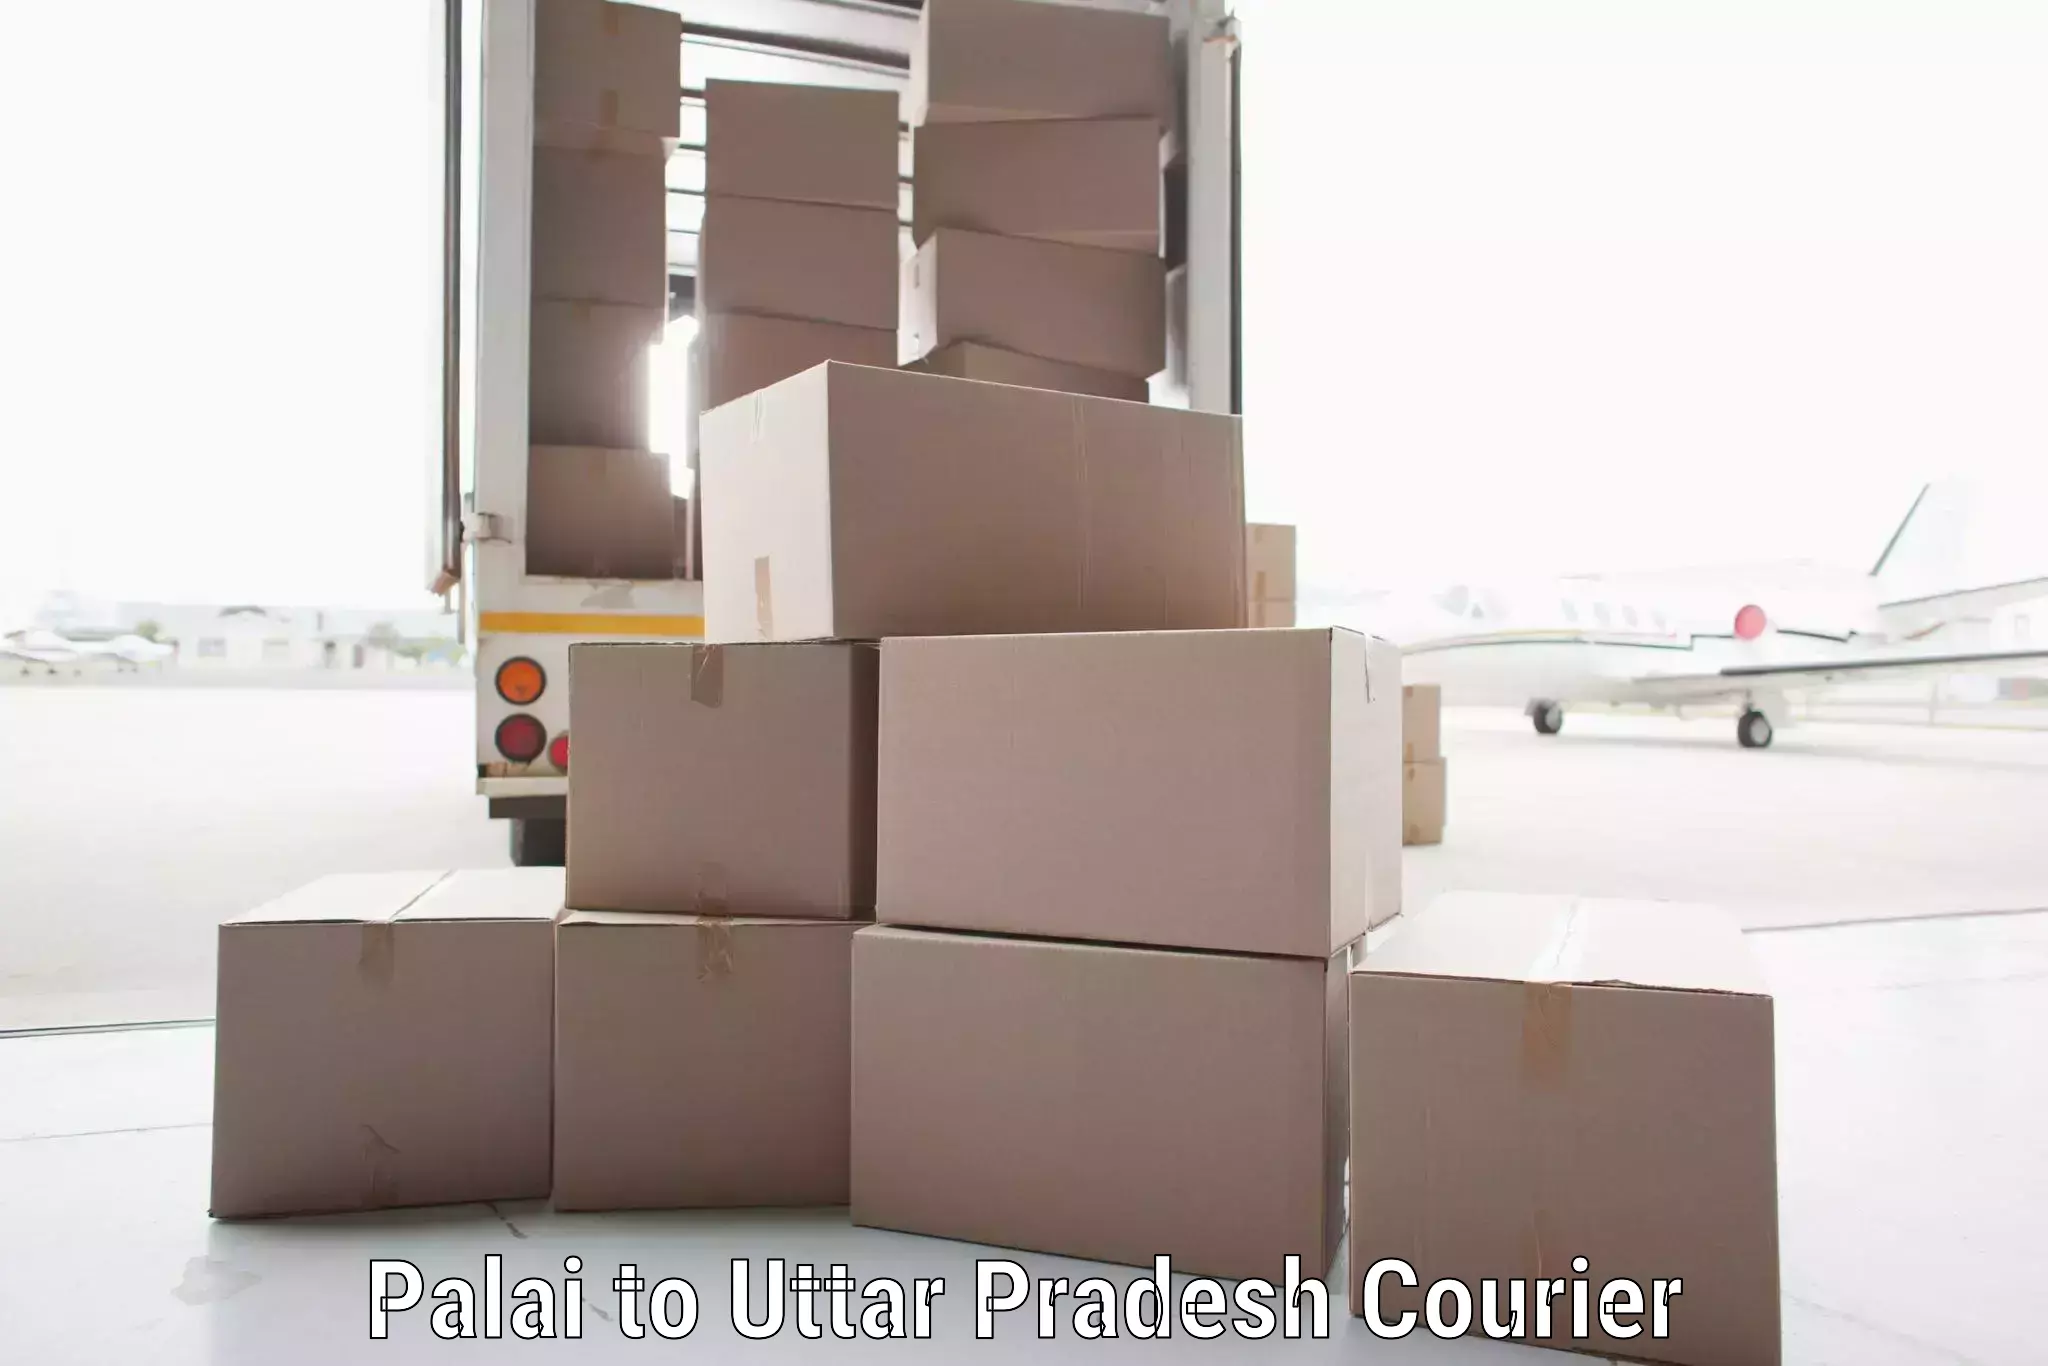 Courier service comparison Palai to Allahabad